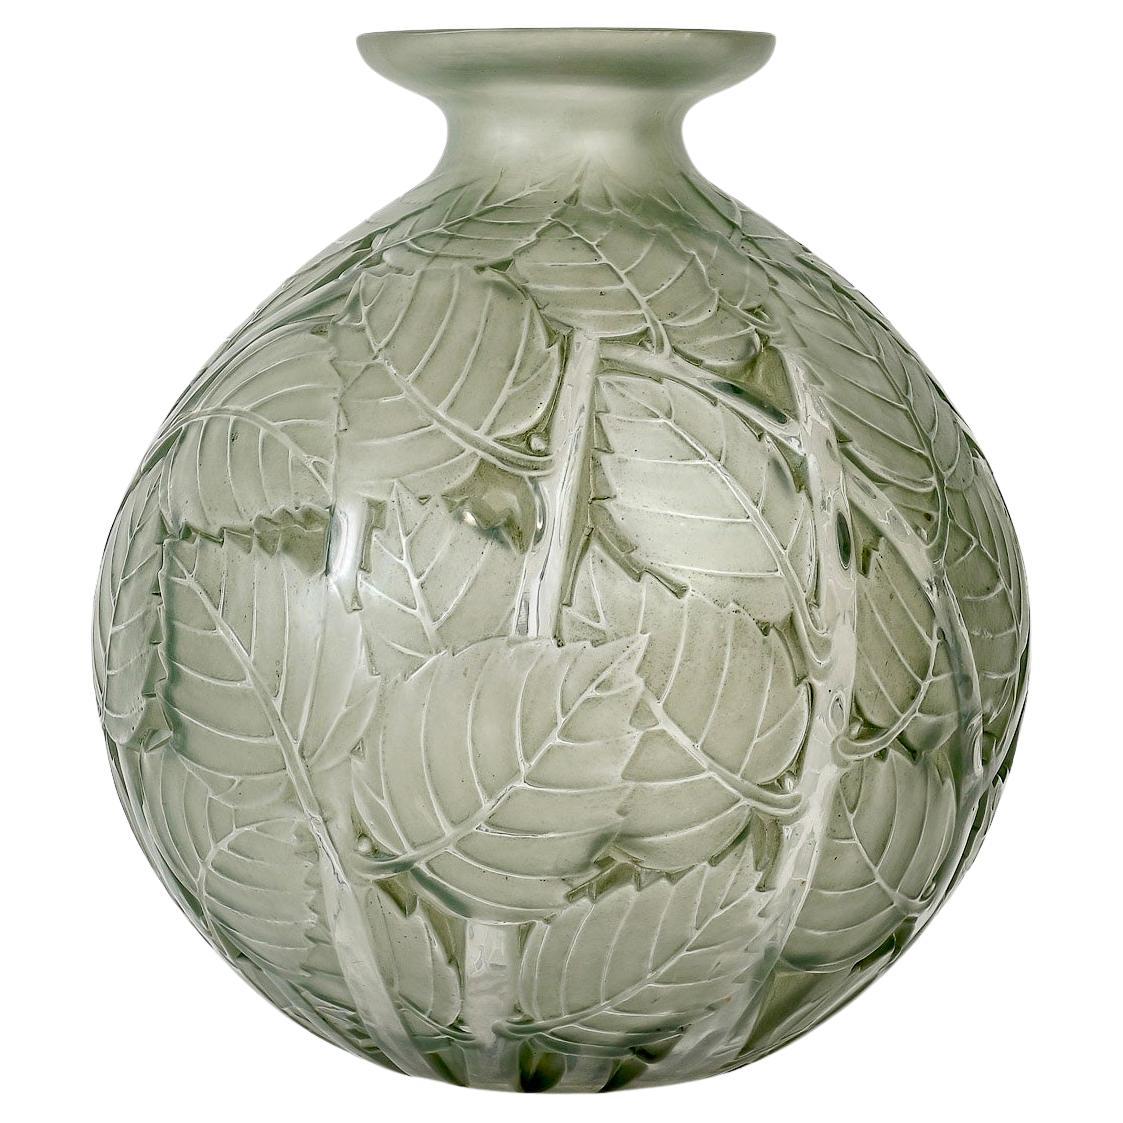 1929 Rene Lalique Vase Milan Frosted Glass with Green Patina For Sale